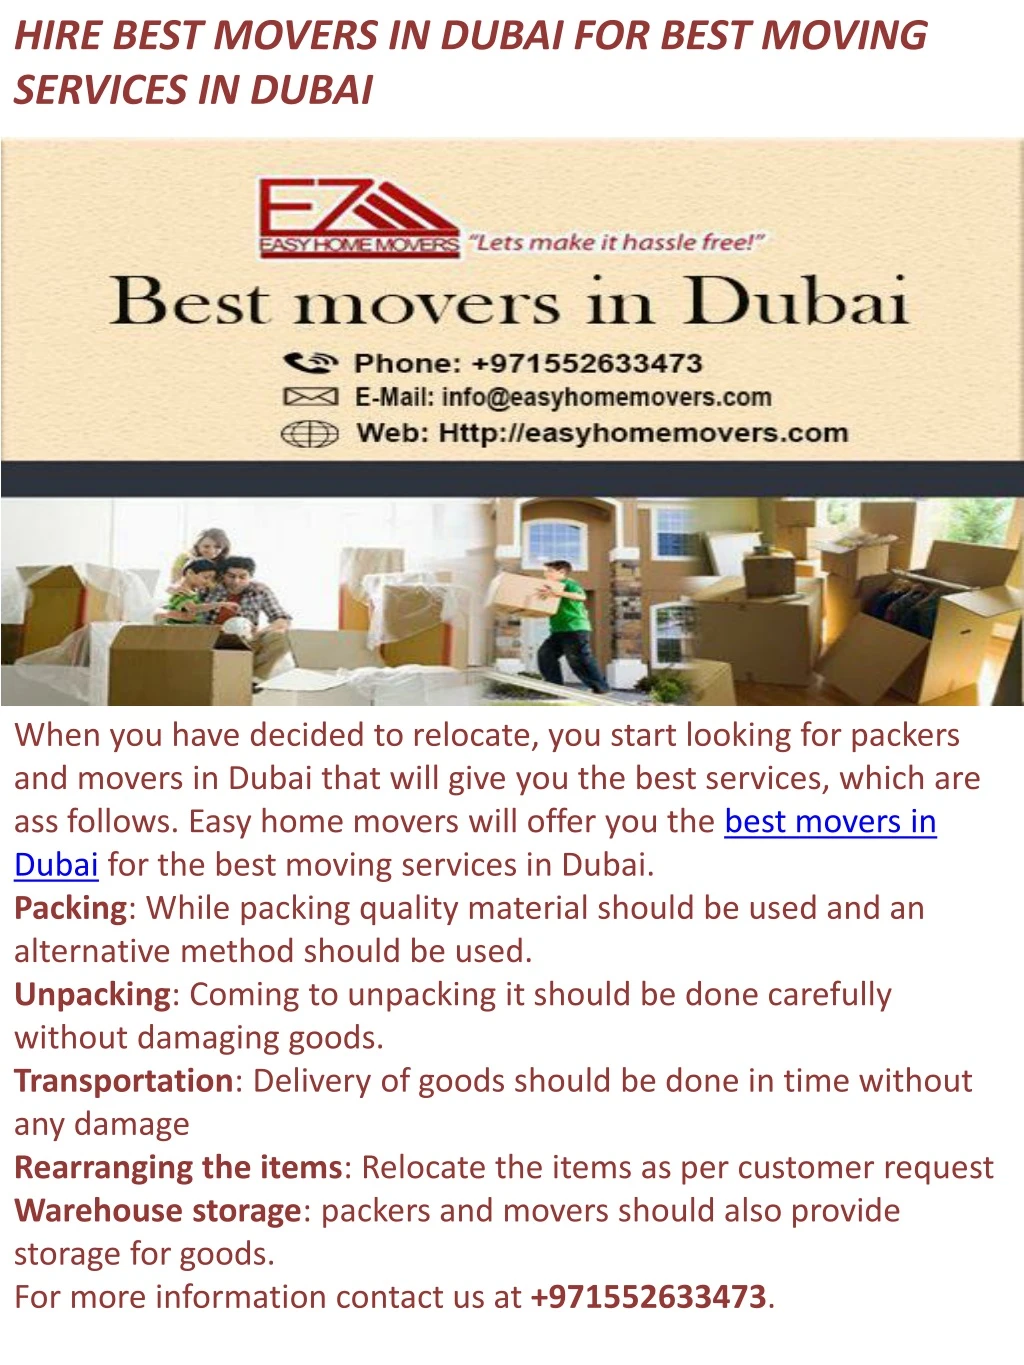 hire best movers in dubai for best moving